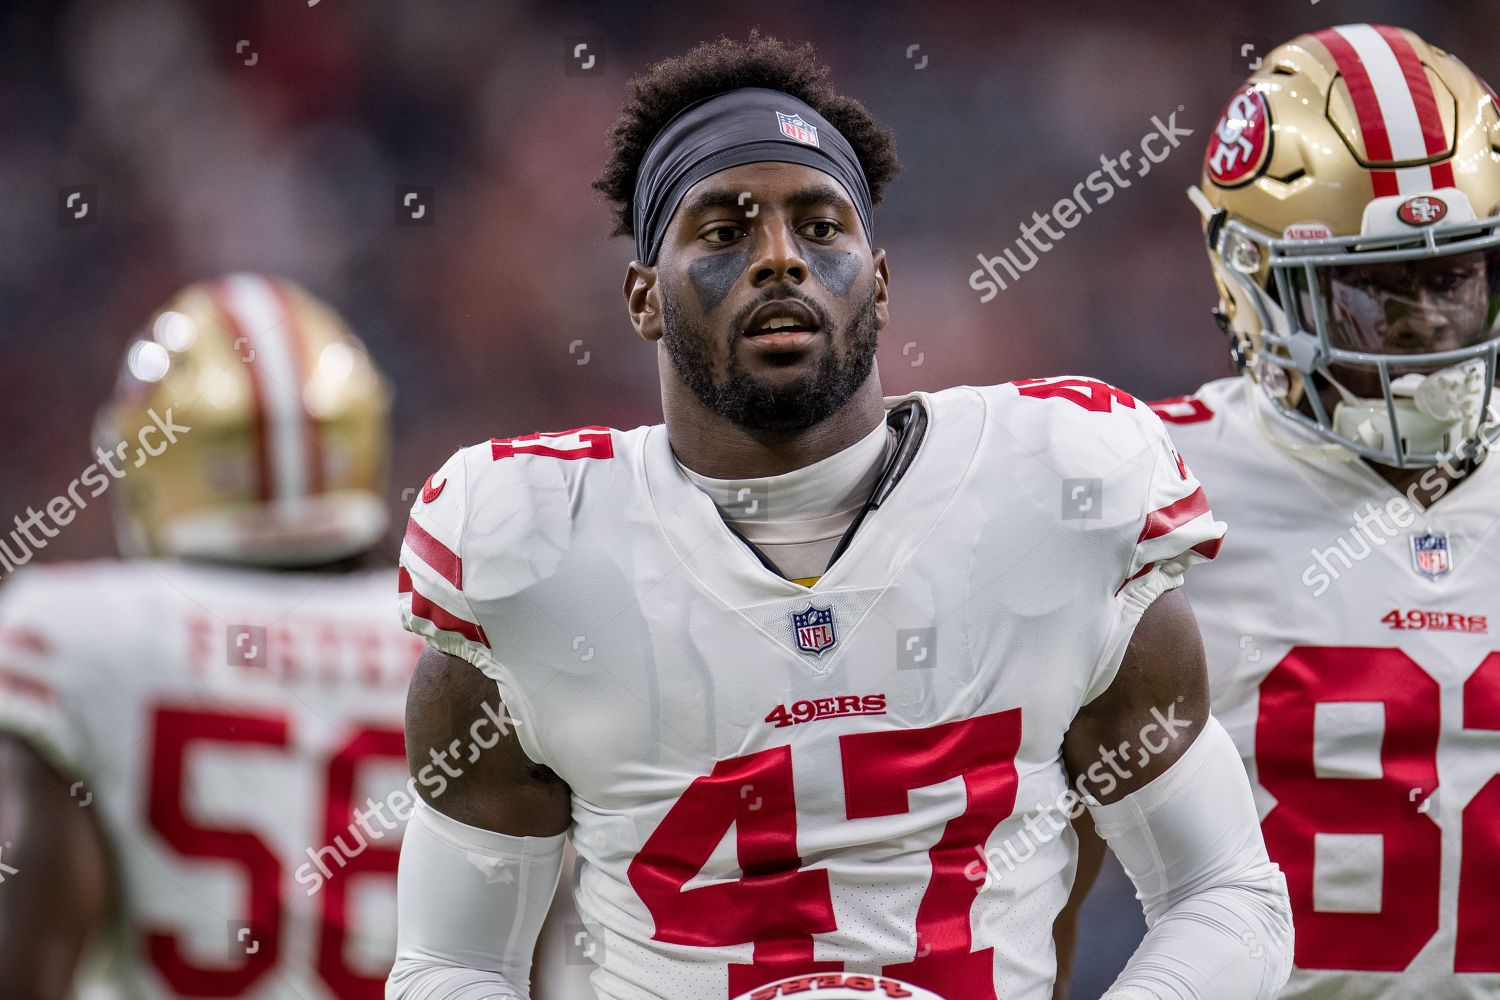 Houston, USA. 18 August 2018. San Francisco 49ers linebacker Elijah Lee  (47) prior to a preseason NFL football game between the Houston Texans and  the San Francisco 49ers at NRG Stadium in